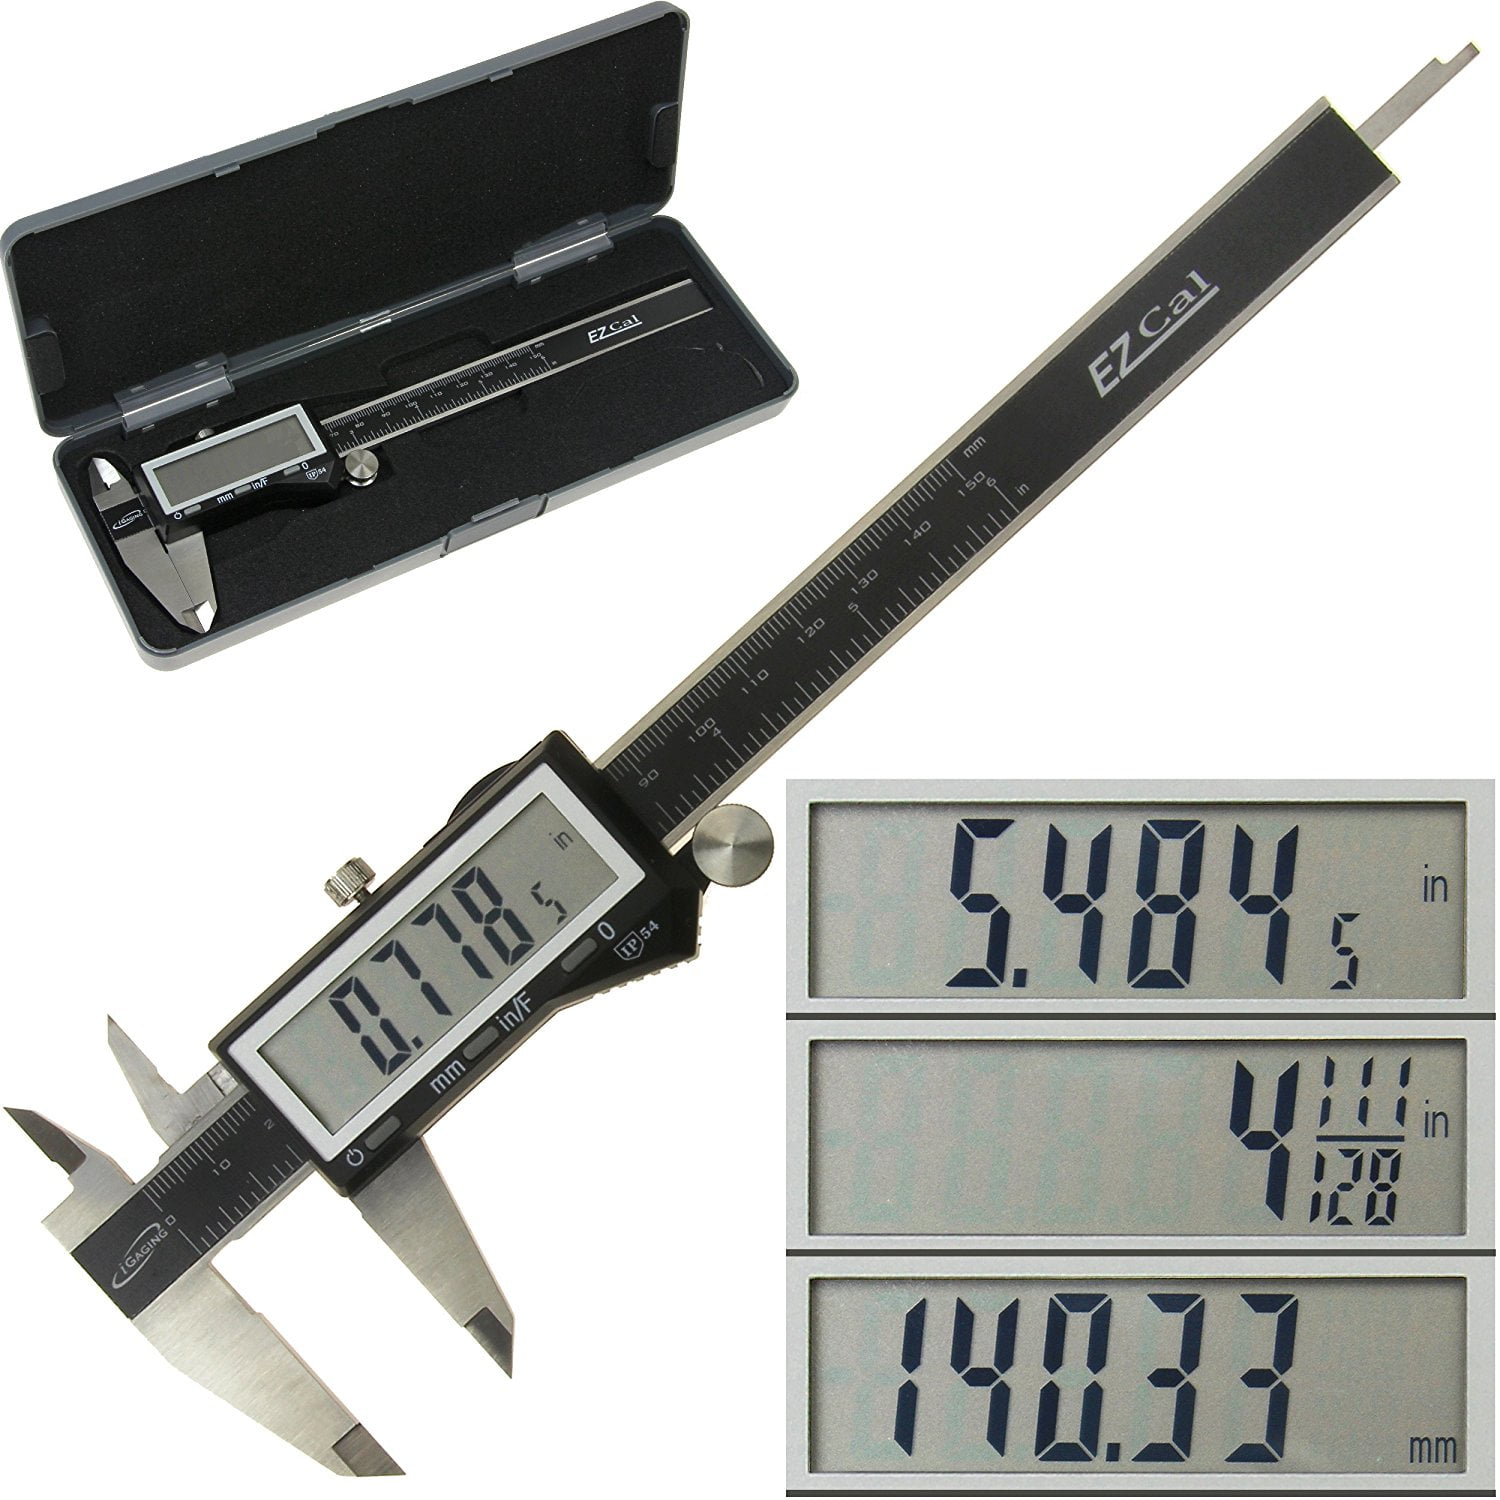 iGaging IP54 Electronic Digital Caliper 0-6 Display Inch/Metric/Fractions Stainless Steel Body 100-333-8B